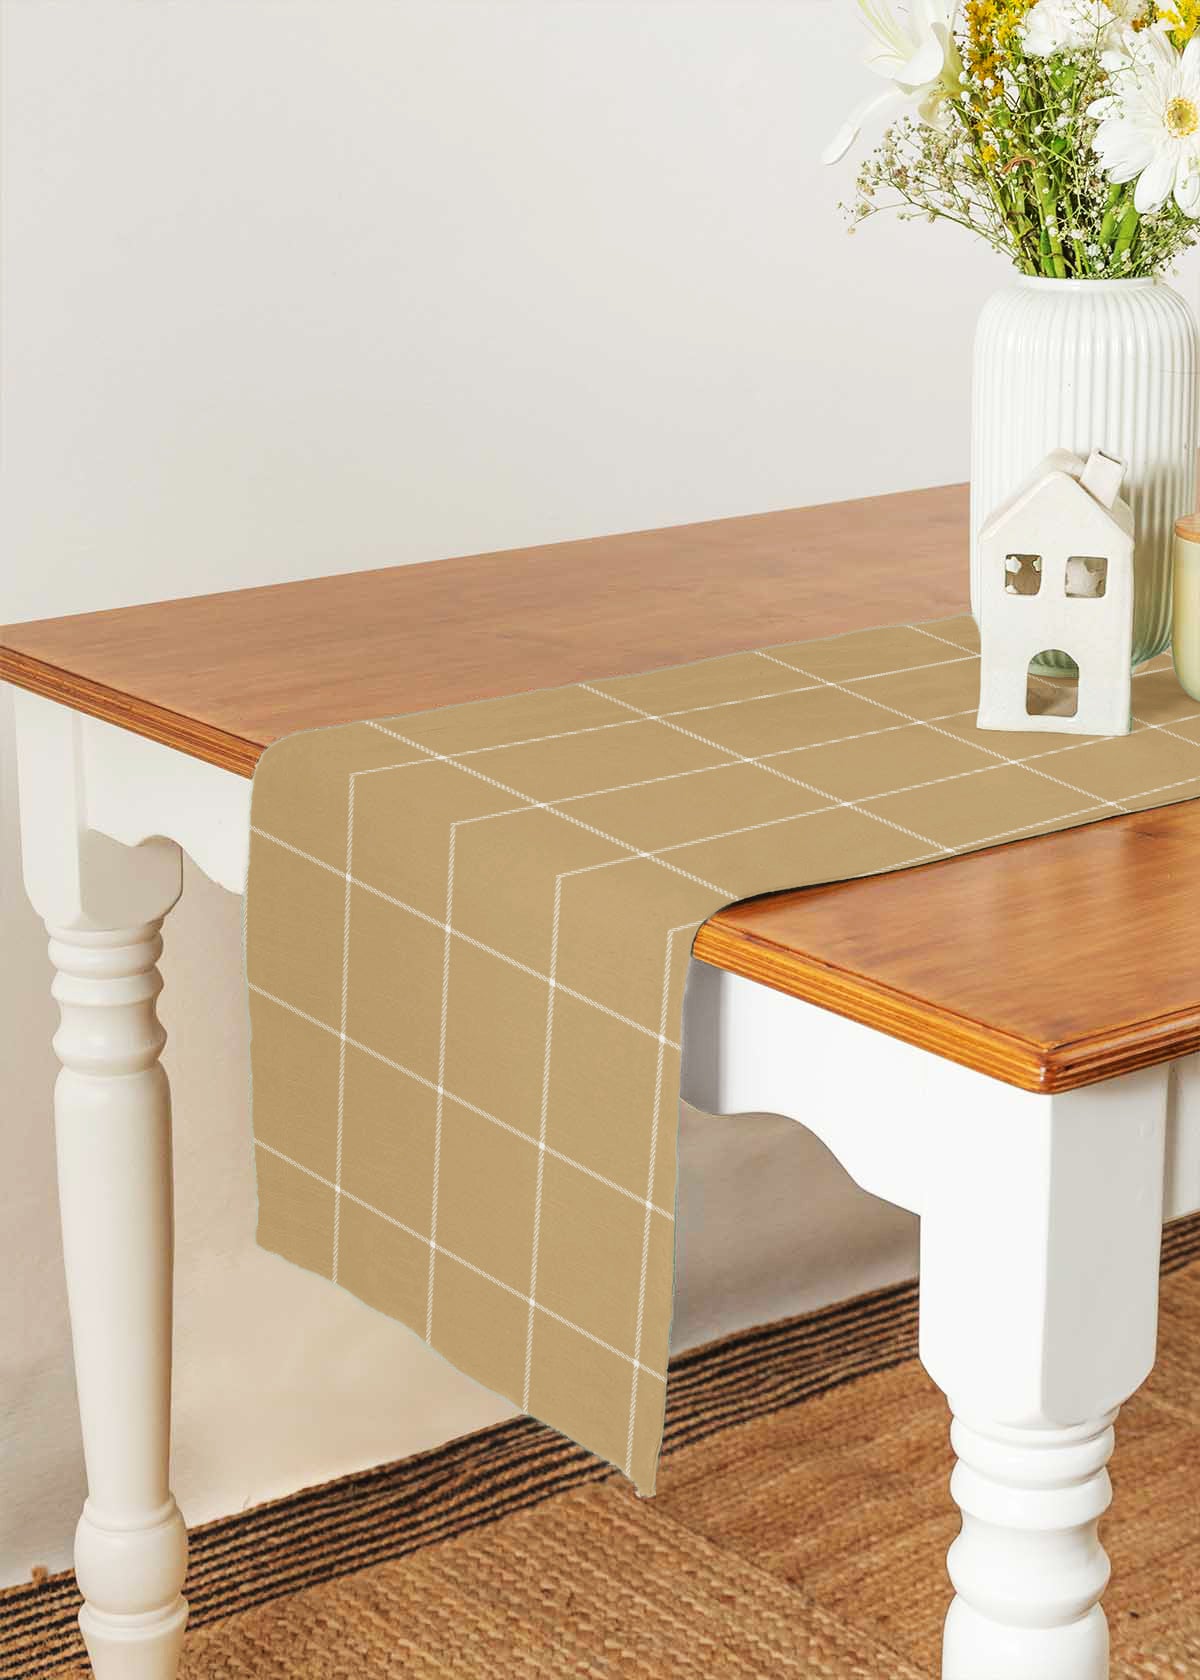 Cabin 100% cotton minimal table runner for 4 seater or 6 seater dining - Brown